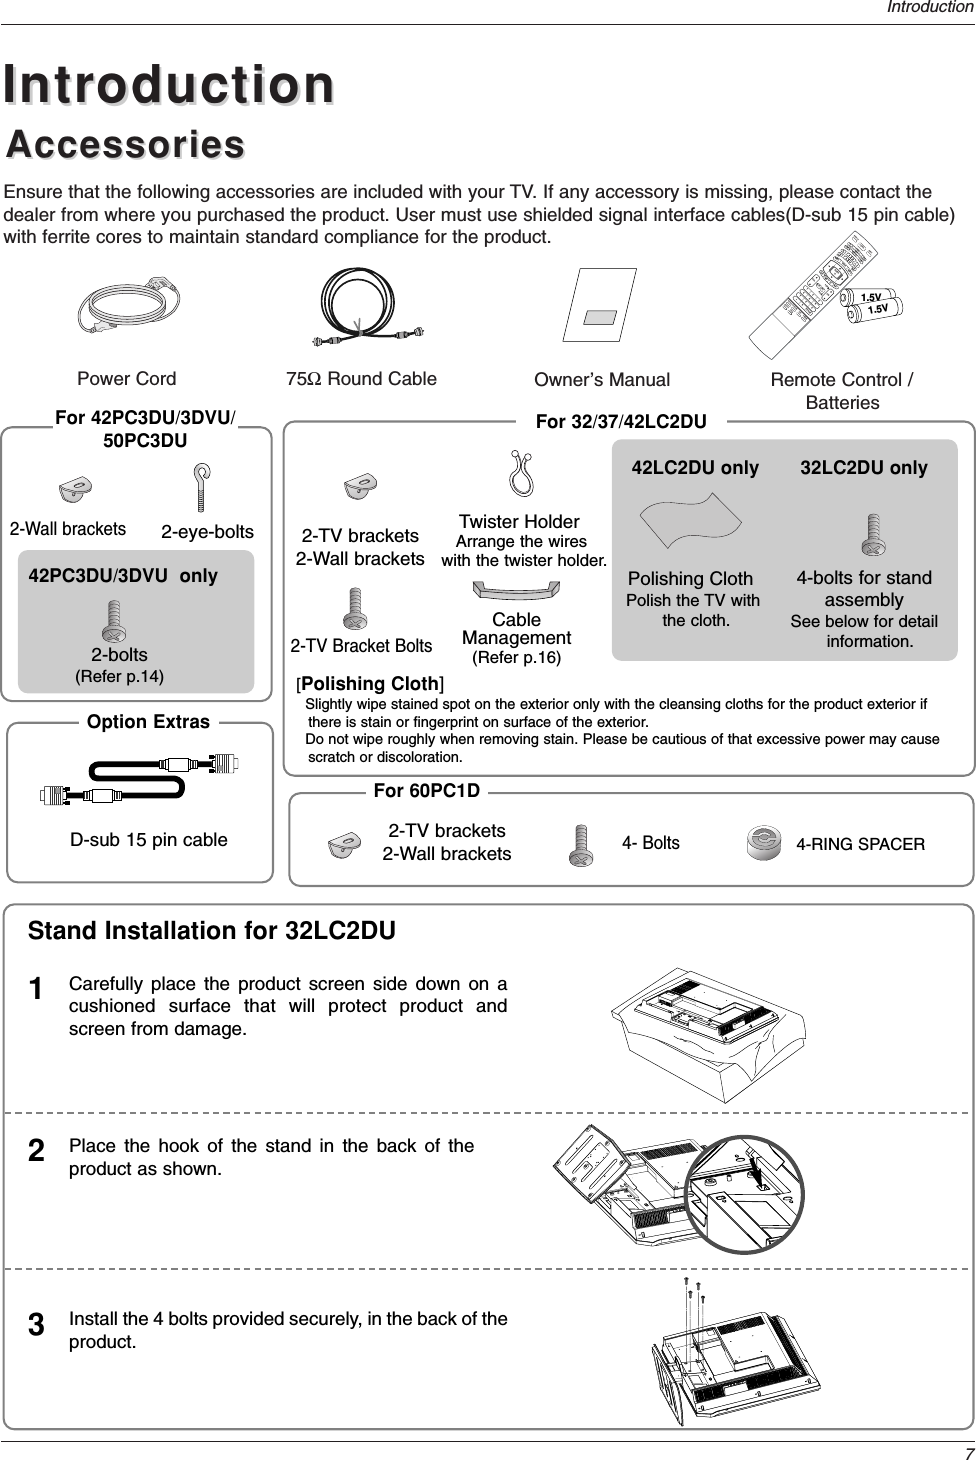 7IntroductionAccessoriesAccessoriesIntroductionIntroductionOwner’s Manual75ΩRound CablePower CordEnsure that the following accessories are included with your TV. If any accessory is missing, please contact thedealer from where you purchased the product. User must use shielded signal interface cables(D-sub 15 pin cable)with ferrite cores to maintain standard compliance for the product.1.5V1.5VVOLFLASHBKCHPOW1 2 3     4 5 6    7809   APMADJUSTSAPEZ SOUNDEZ PICFREEZEAUDIODAY -CABLEGUIDEMENUMUTEPAGEPAGEFAVDAY+STBEXITTIMERCCTVDVDMODEINFOENTERVOLCHPOWER1 2 3     4 5 6    7809   MENUMUTEFAVRATIODAY -GUIDEDAY+RATIOVCRTVDVDENTERAPMADJUSTSAPEZ SOUNDEZ PICFREEZEFLASHBKPAGEPAGEEXITTIMERCCINFOAUDIOCABLESTBMODETV INPUTINPUTTV INPUTRemote Control /Batteries2-eye-bolts 2-TV brackets2-Wall brackets2-TV Bracket BoltsFor 32/37/42LC2DUFor 42PC3DU/3DVU/50PC3DUTwister HolderArrange the wires with the twister holder.CableManagement(Refer p.16)2-Wall brackets42PC3DU/3DVU  only2-bolts(Refer p.14)4-bolts for standassemblySee below for detailinformation.32LC2DU only42LC2DU onlyPolishing ClothPolish the TV withthe cloth.Carefully place the product screen side down on acushioned surface that will protect product andscreen from damage.1Place the hook of the stand in the back of theproduct as shown.2Install the 4 bolts provided securely, in the back of theproduct.3Stand Installation for 32LC2DU[Polishing Cloth]Slightly wipe stained spot on the exterior only with the cleansing cloths for the product exterior ifthere is stain or fingerprint on surface of the exterior.  Do not wipe roughly when removing stain. Please be cautious of that excessive power may causescratch or discoloration. Option ExtrasD-sub 15 pin cable 4-RING SPACERFor 60PC1D2-TV brackets2-Wall brackets4- Bolts